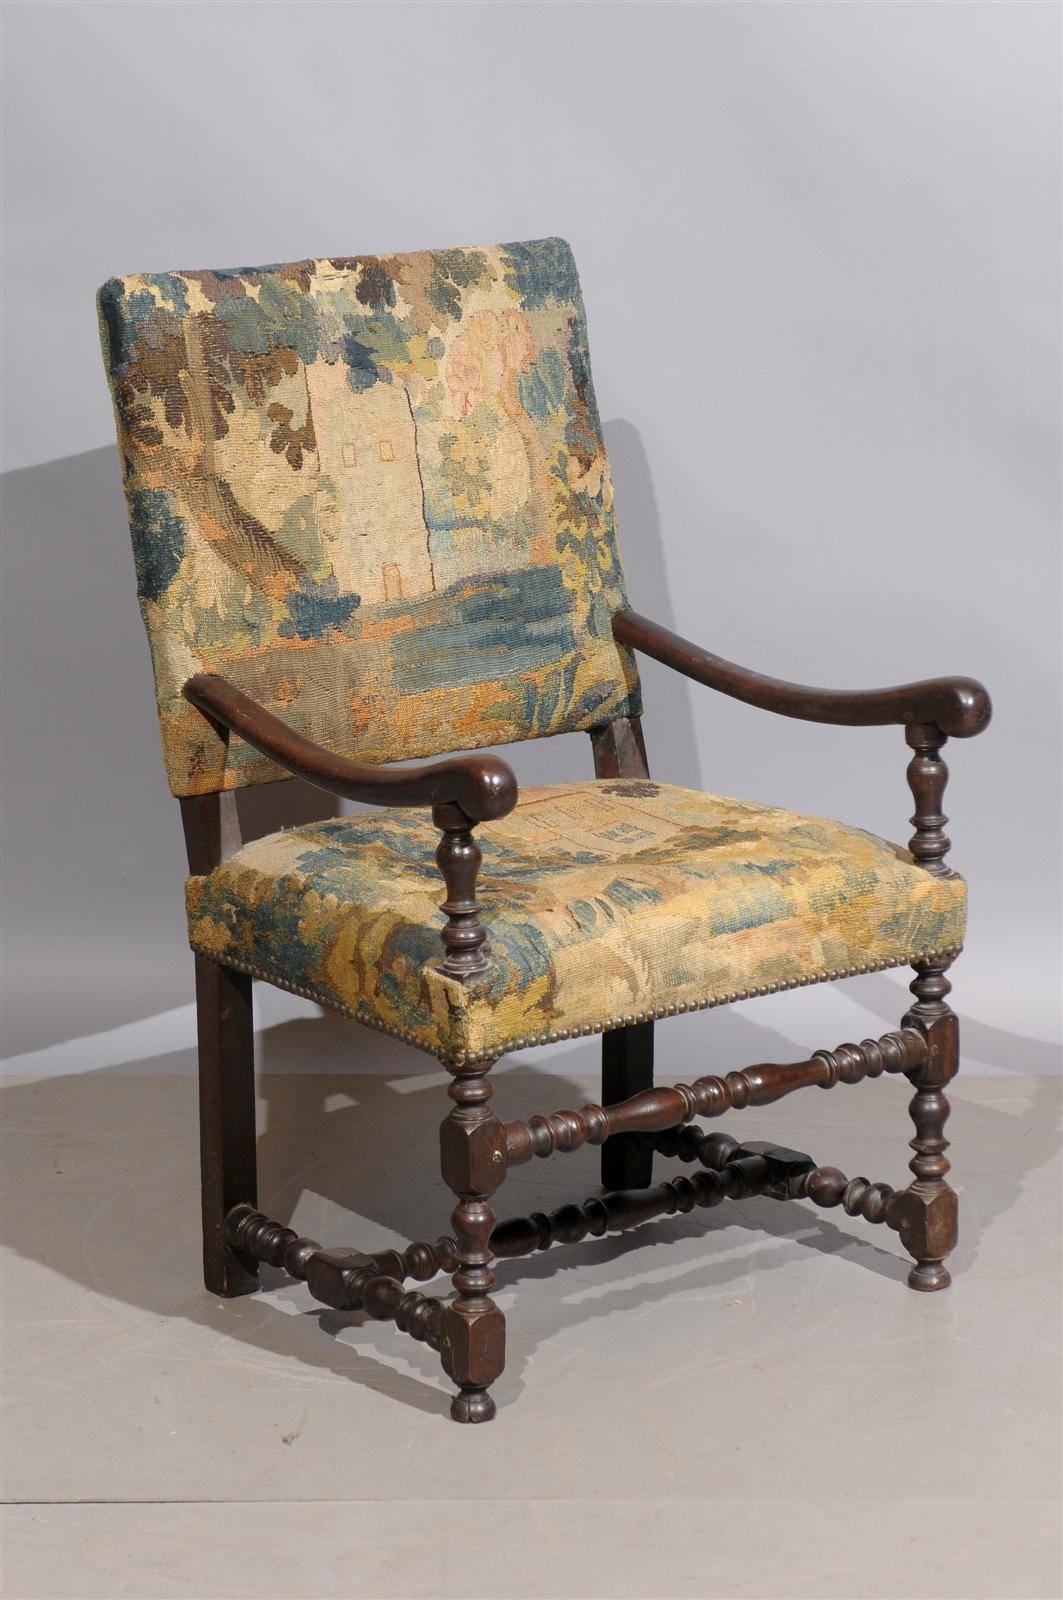 18th century French Louis XIII style walnut fauteuil with tapestry upholstery and turned legs.

William Word Fine Antiques: Atlanta's Source since 1956.